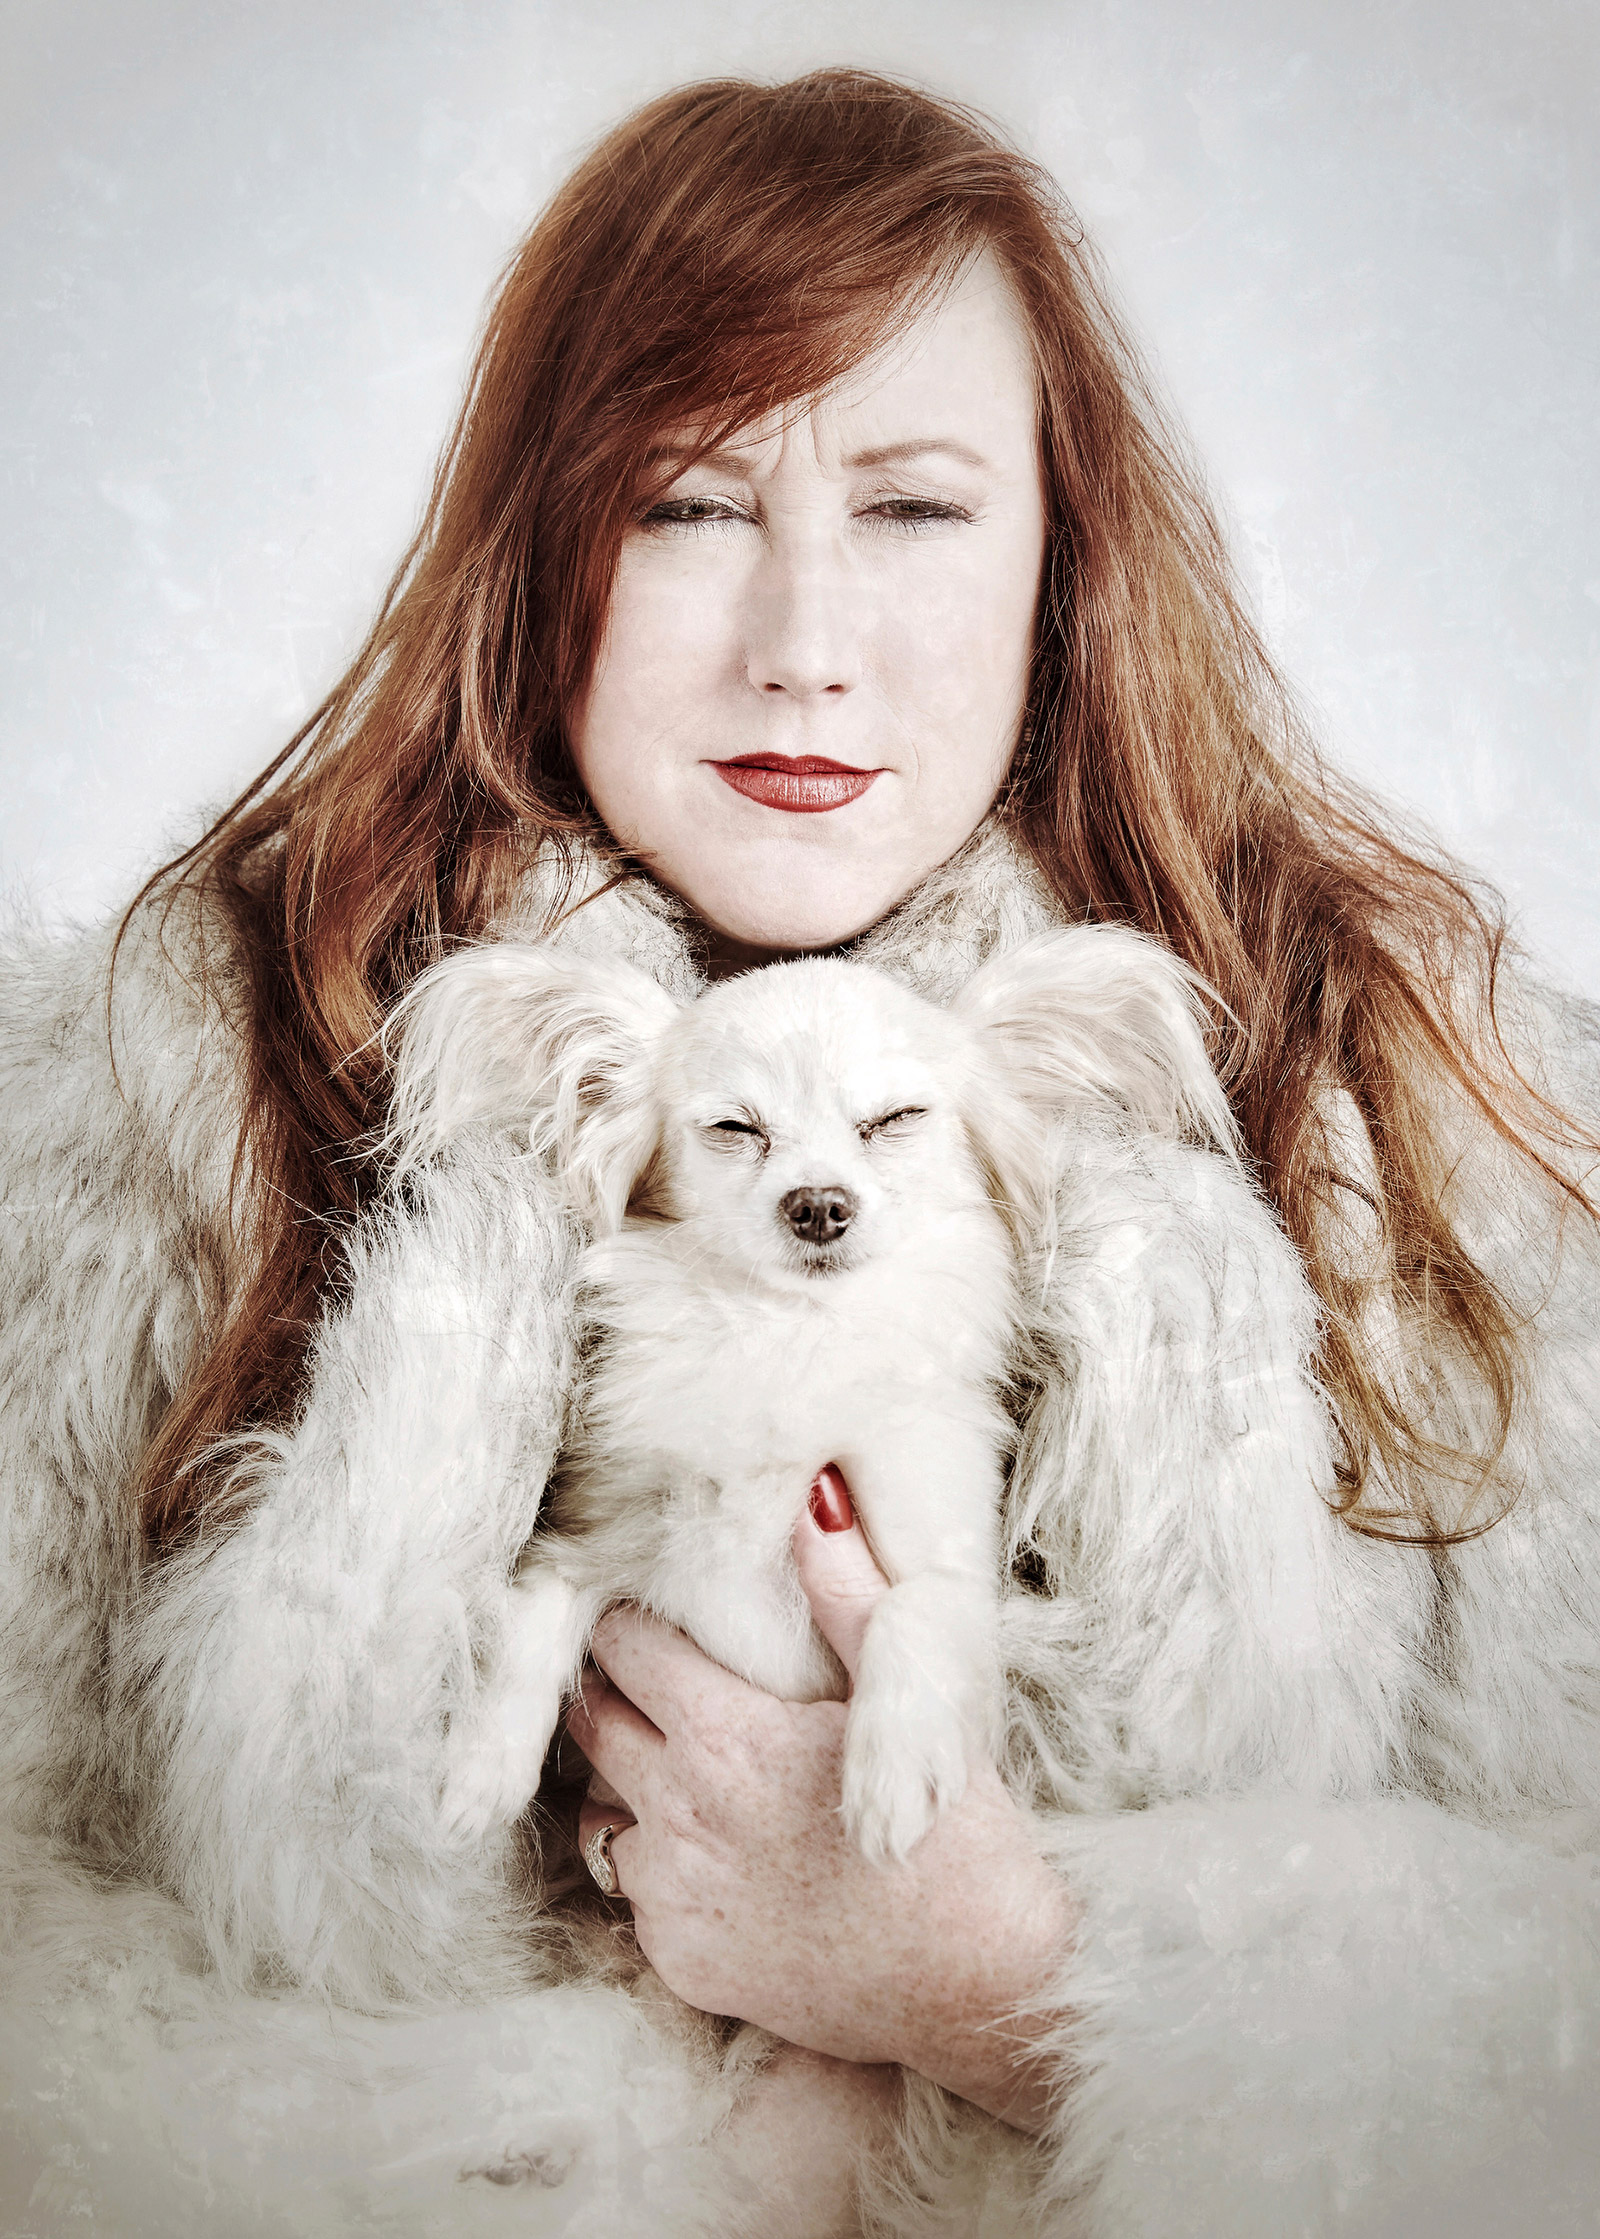 These striking portraits celebrate redheads young and old